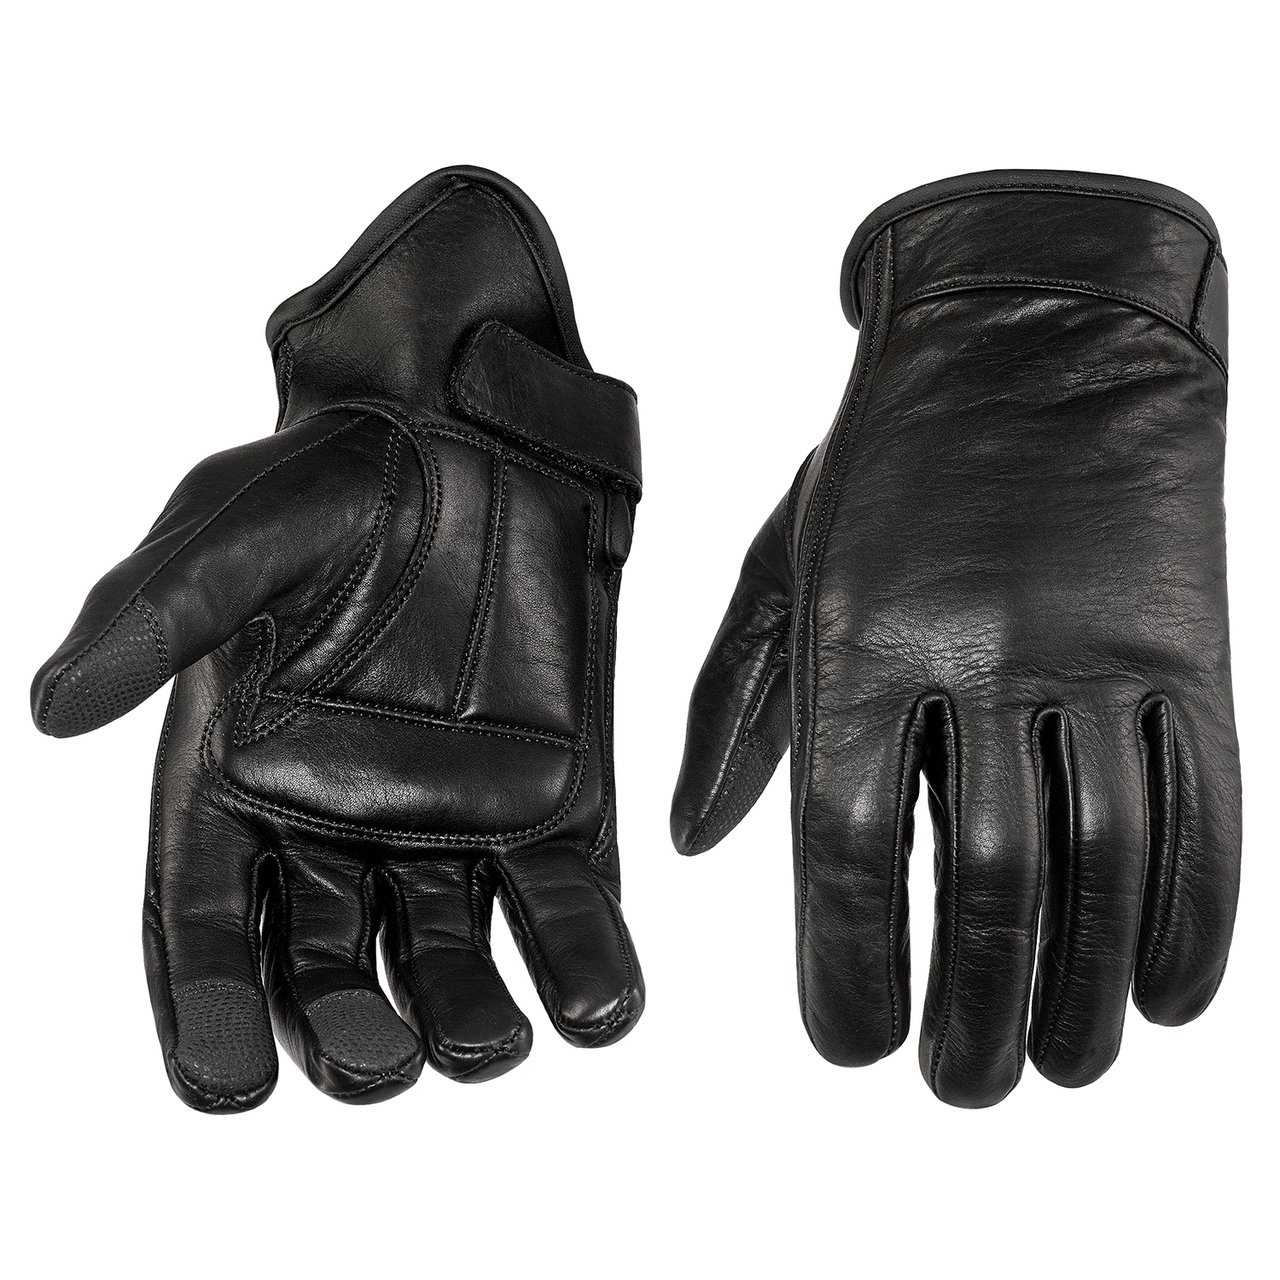 Lightweight Premium Leather Motorcycle Gloves rider racing gloves for motorcycle